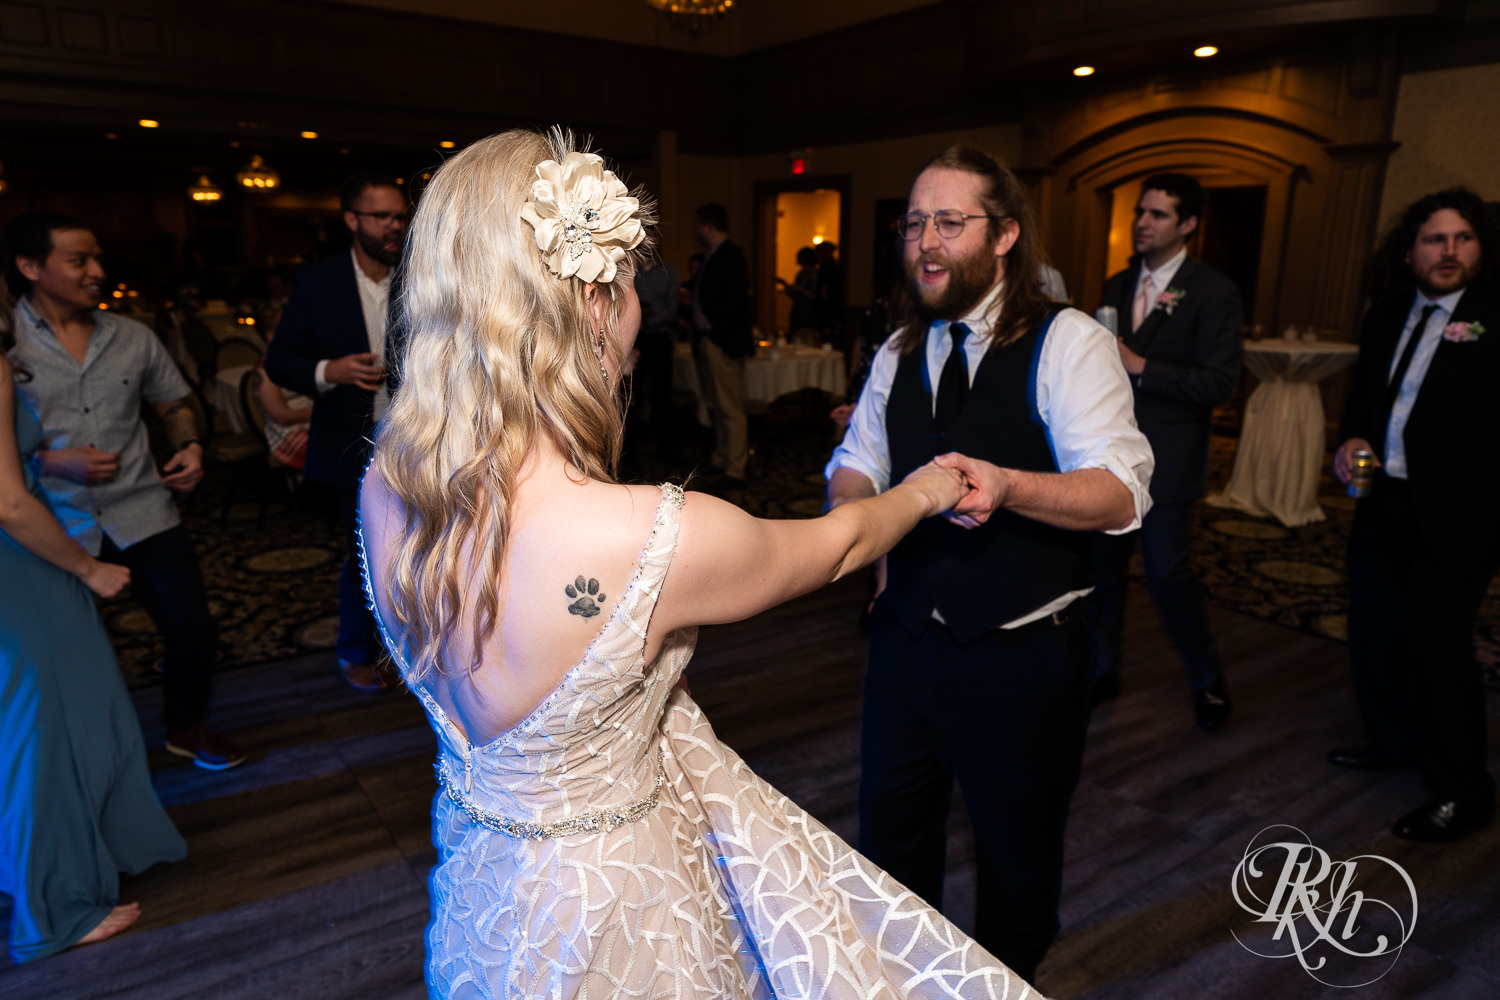 Guests dance at wedding reception at Rush Creek Golf Club in Maple Grove, Minnesota.